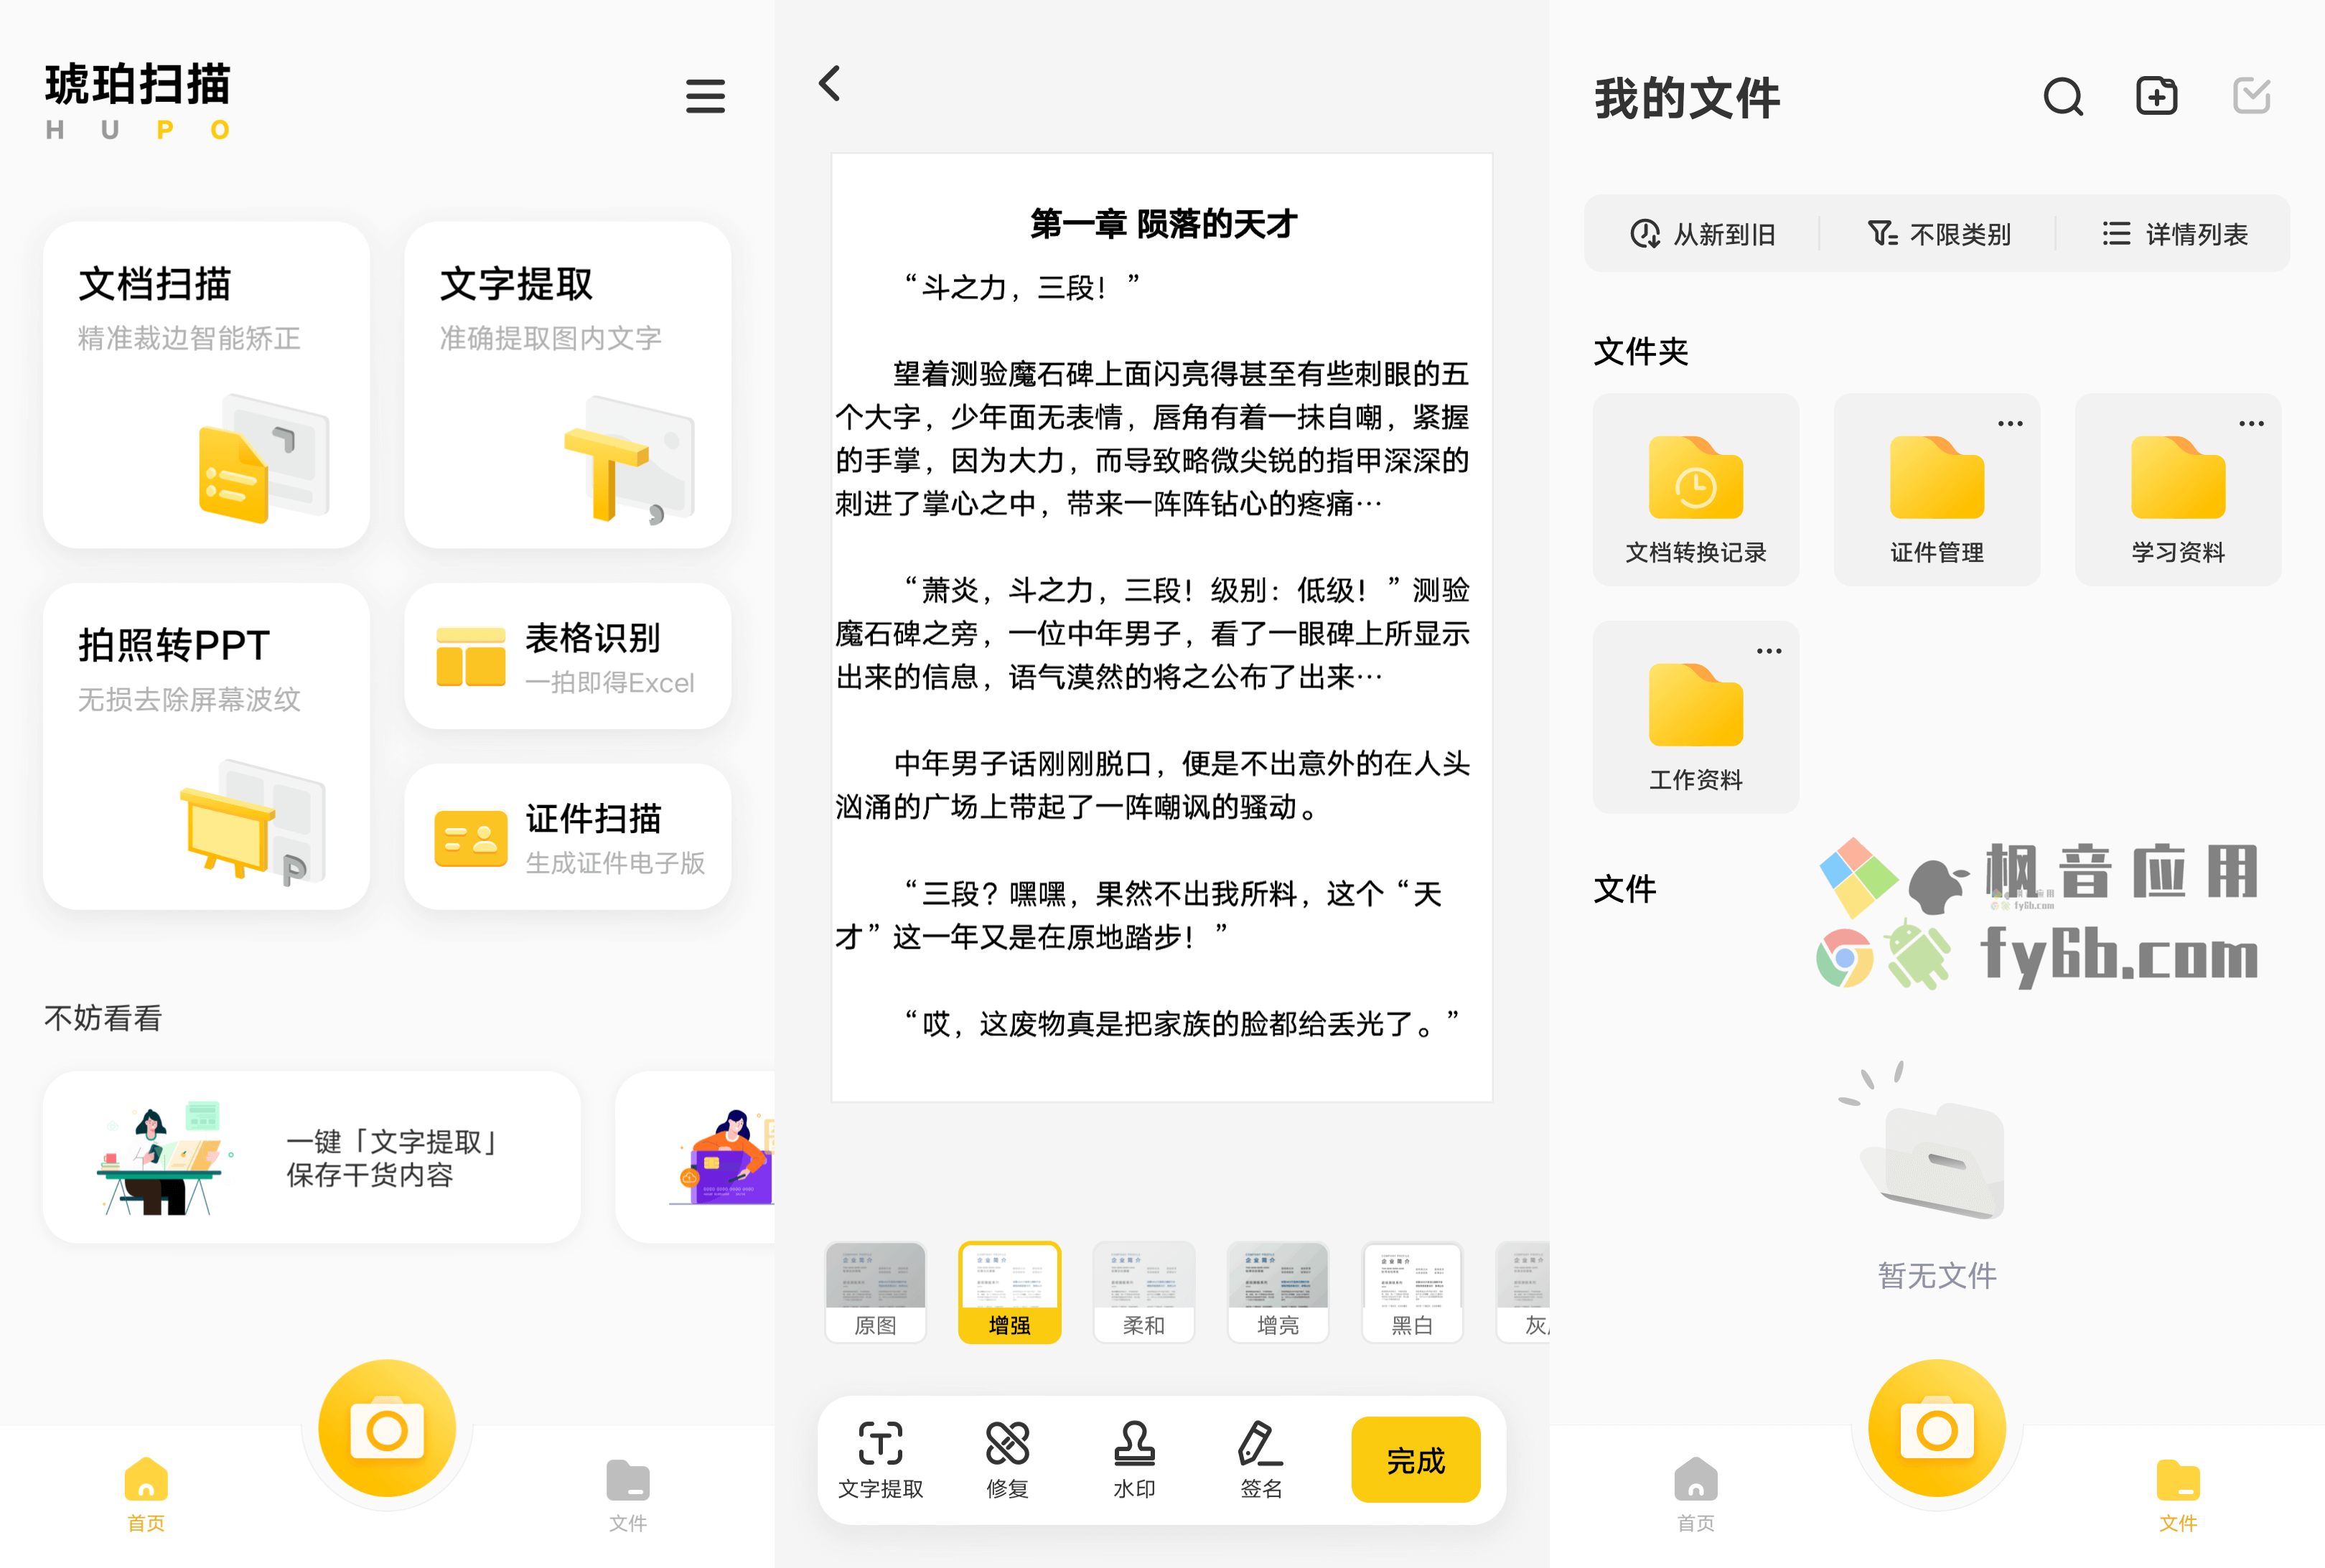 Android 琥珀扫描_v2.0.5.0